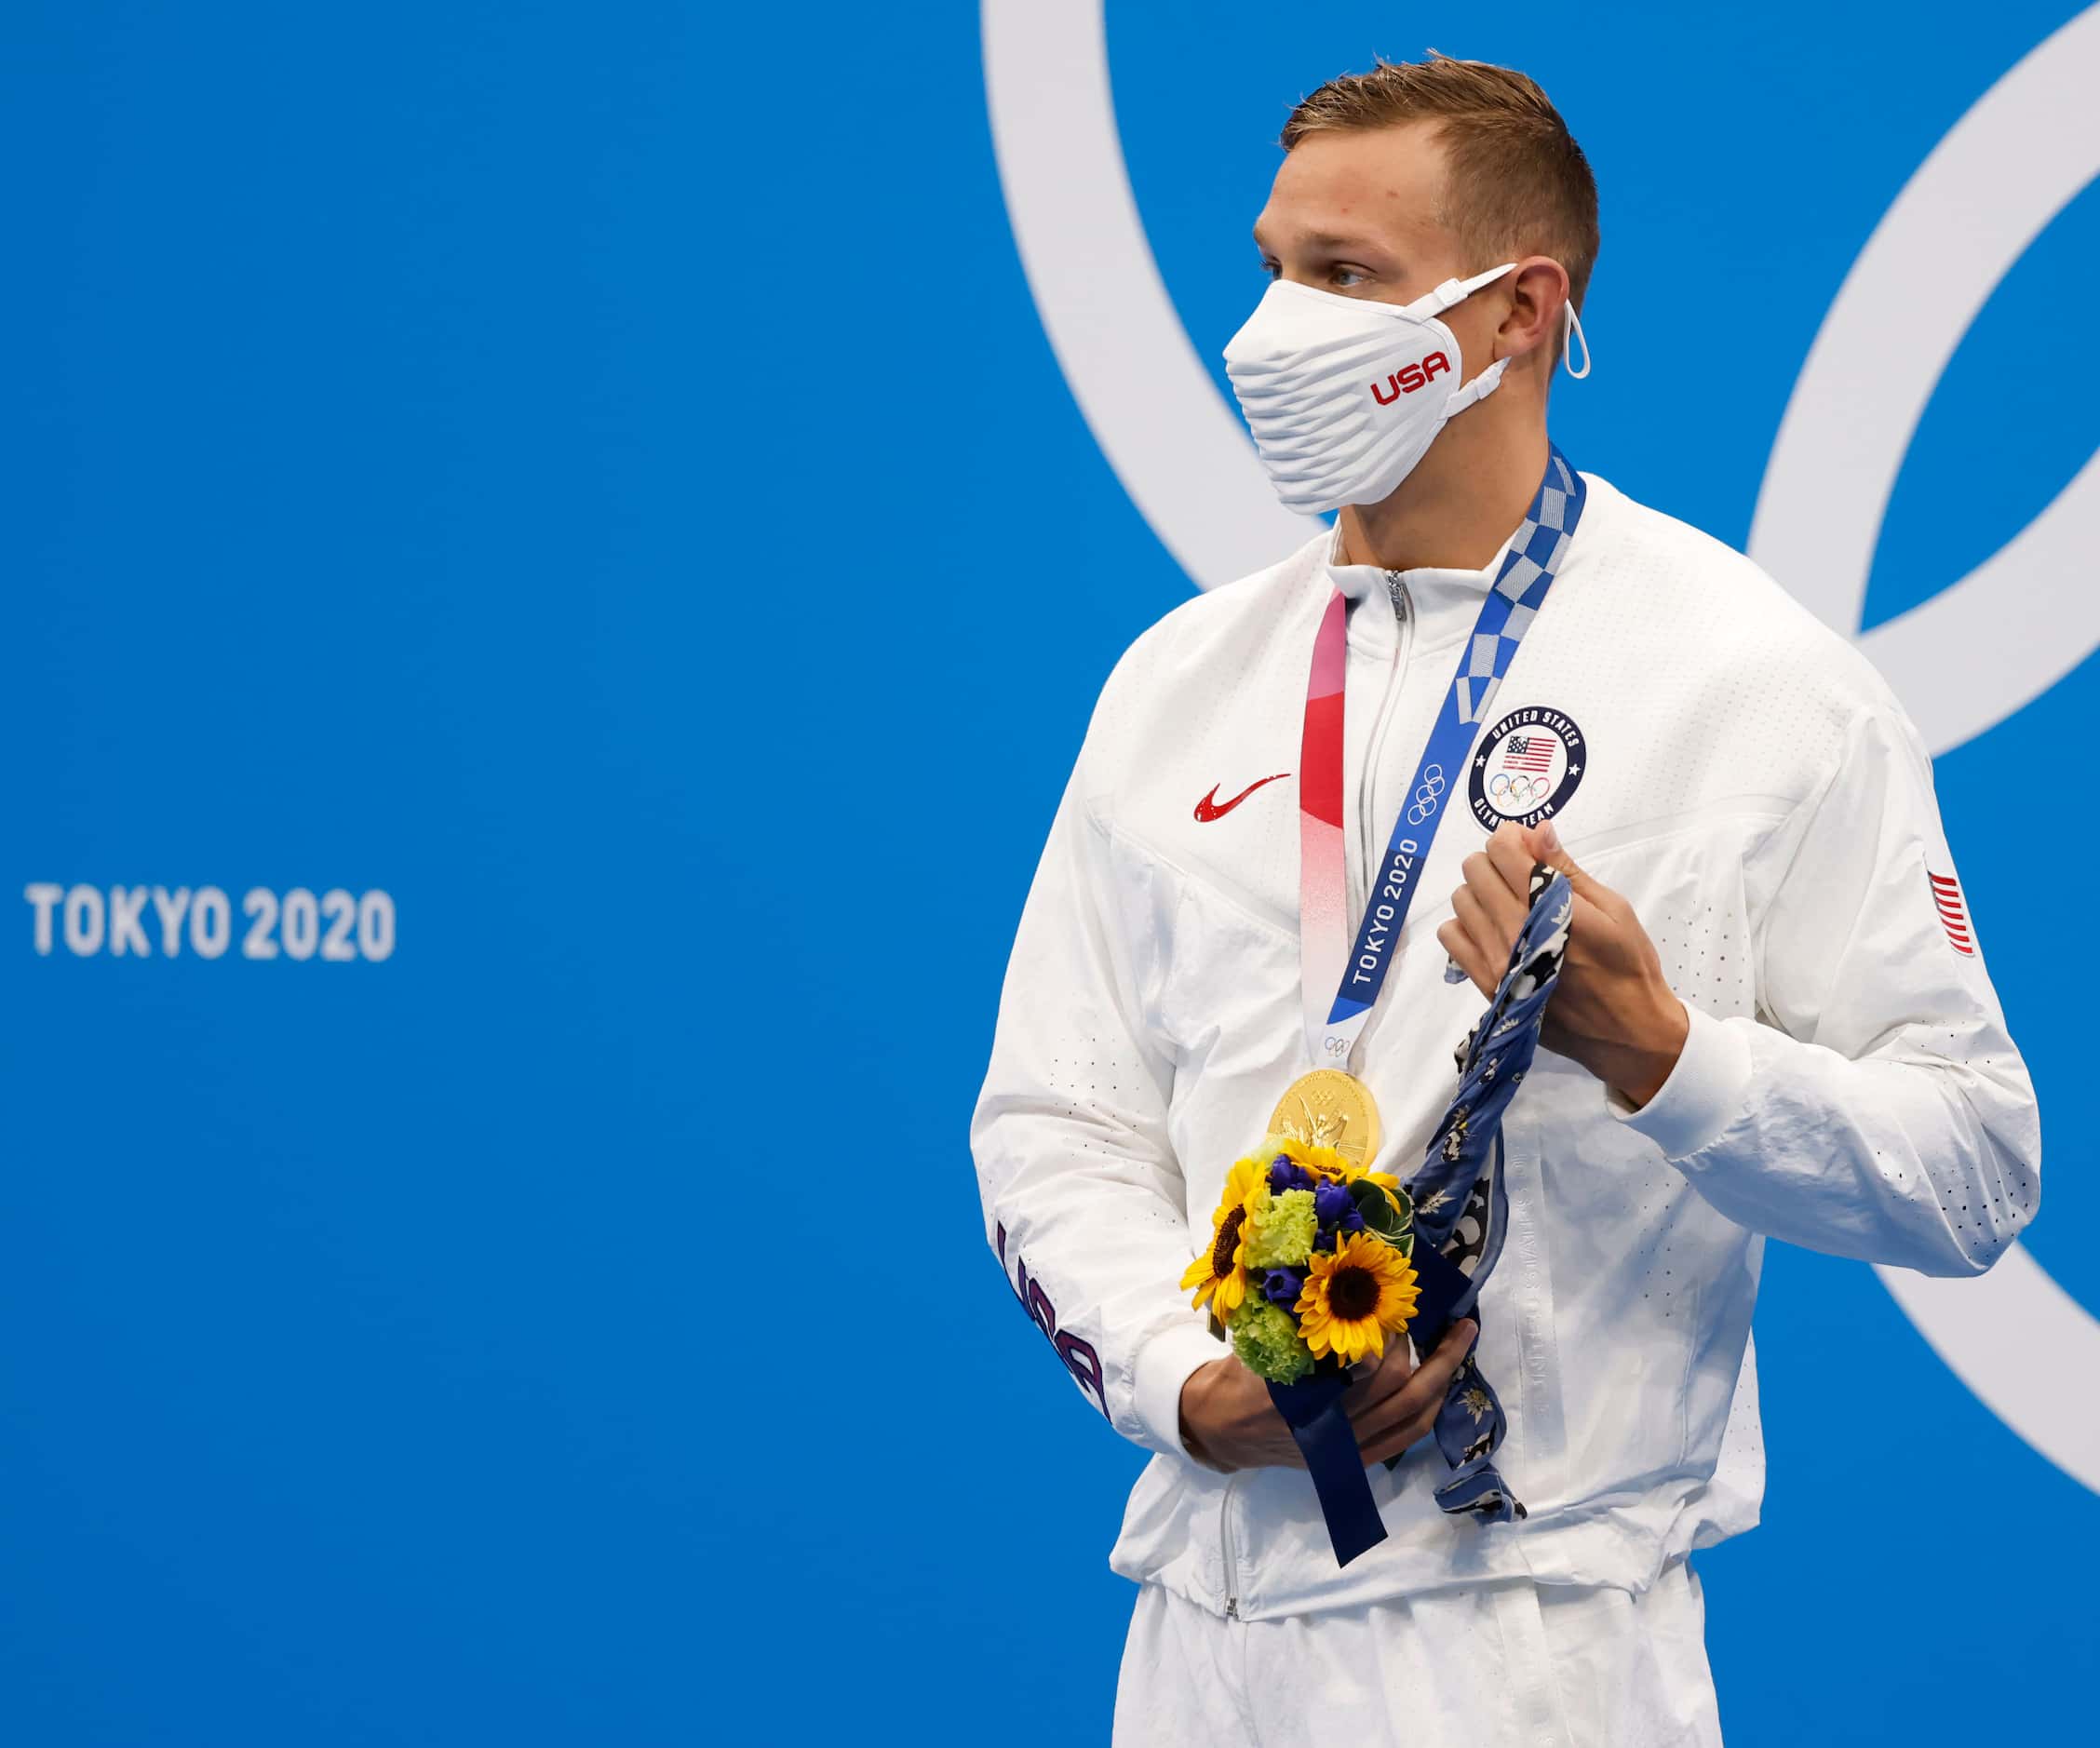 USA’s Caeleb Dressel wraps fabric around his hand after receiving his gold medal during the...